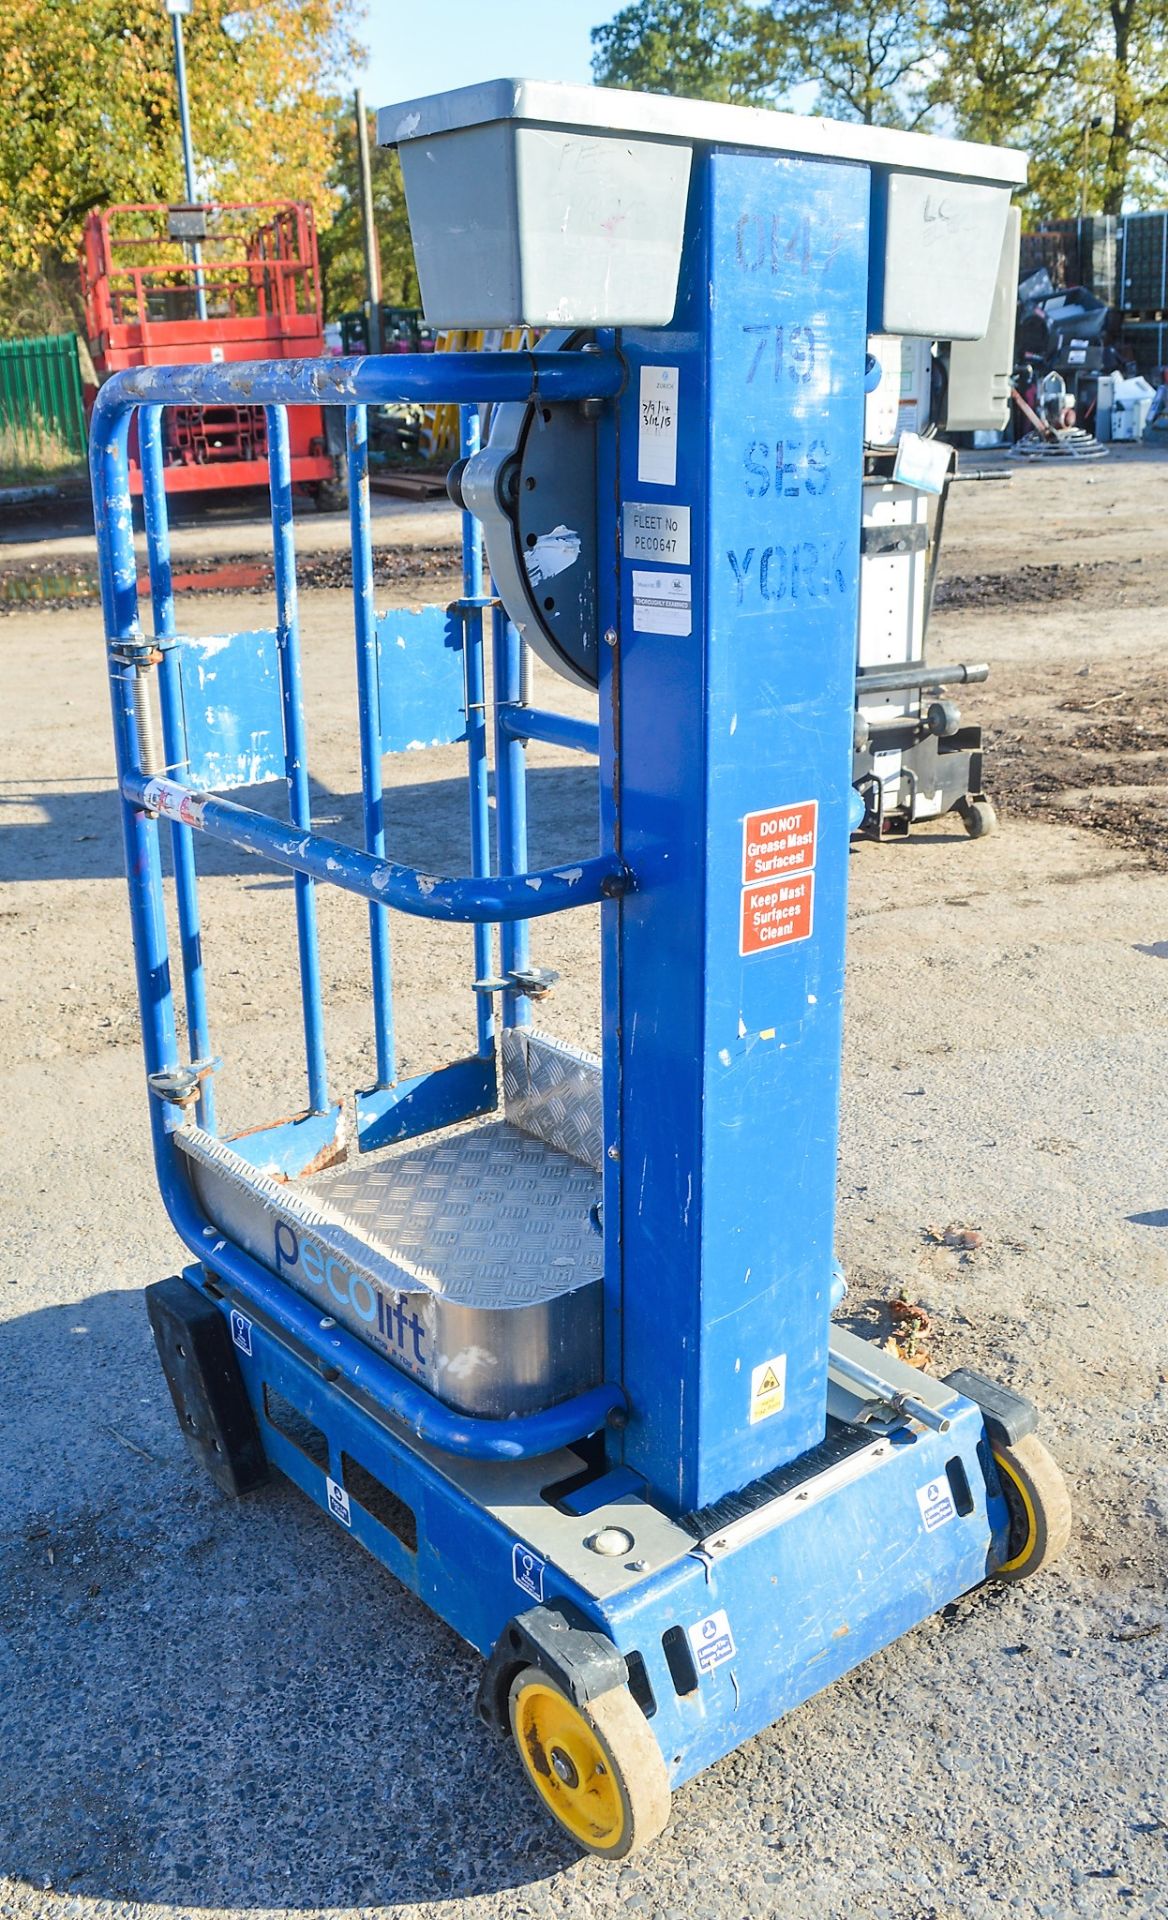 Power Tower Peco Lift manual vertical personnel lift 0147719 - Image 2 of 2